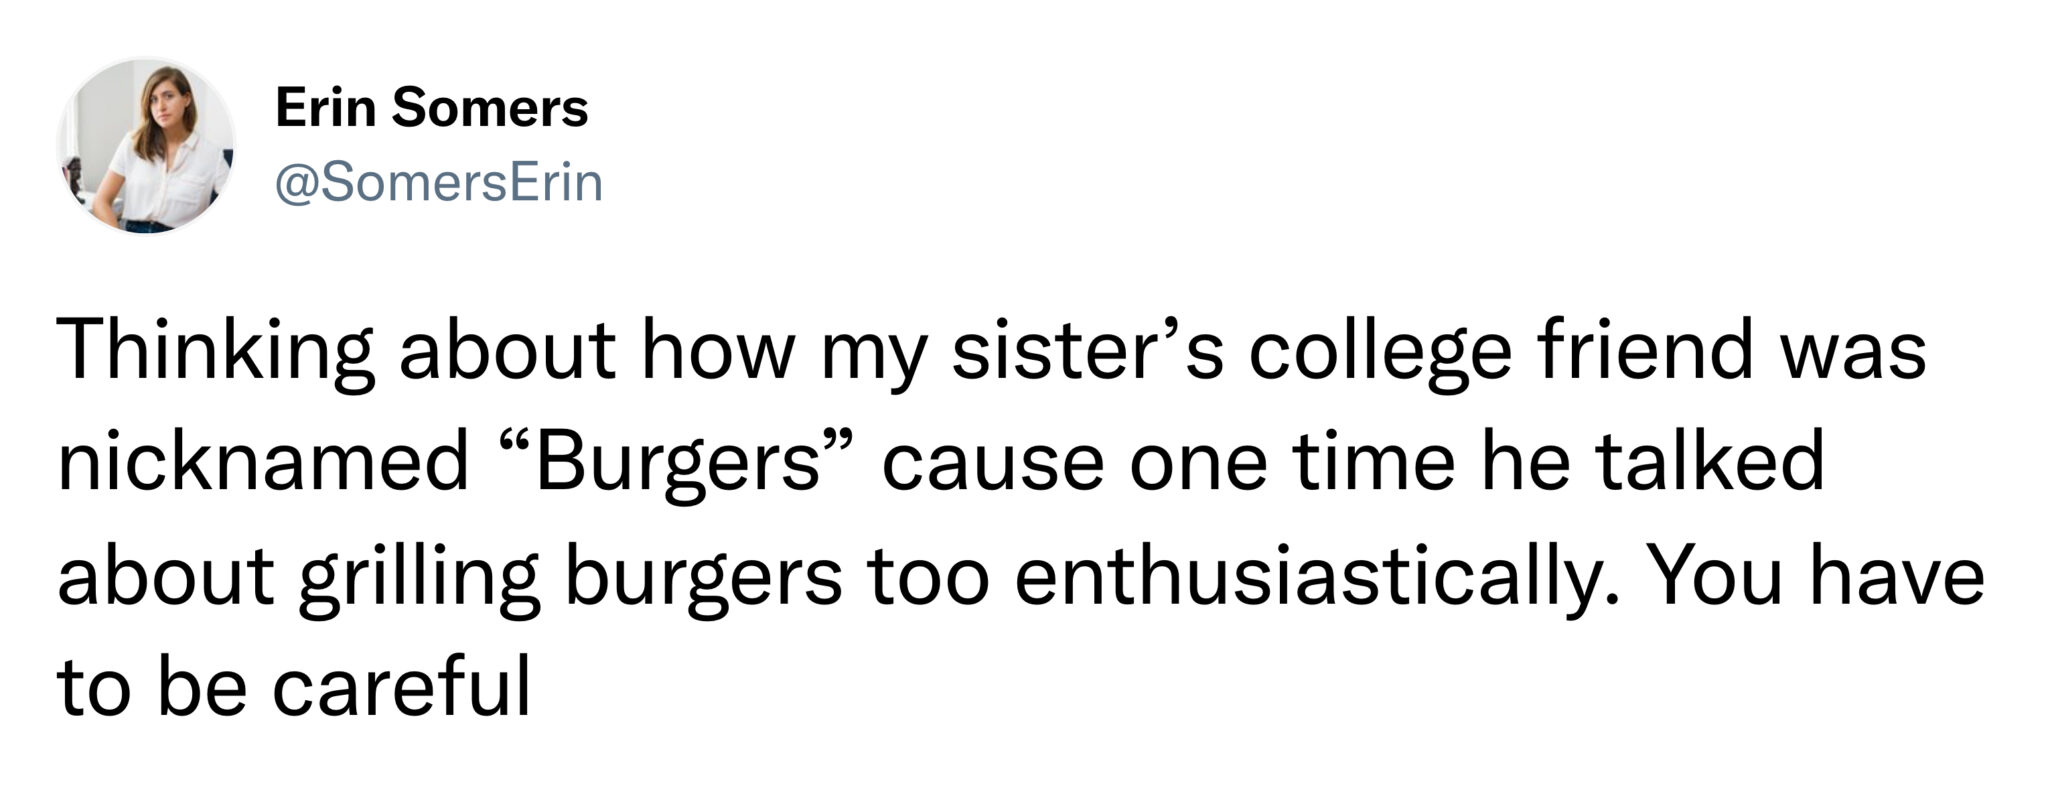 funny tweets and memes -  angle - Erin Somers Thinking about how my sister's college friend was nicknamed "Burgers" cause one time he talked about grilling burgers too enthusiastically. You have to be careful